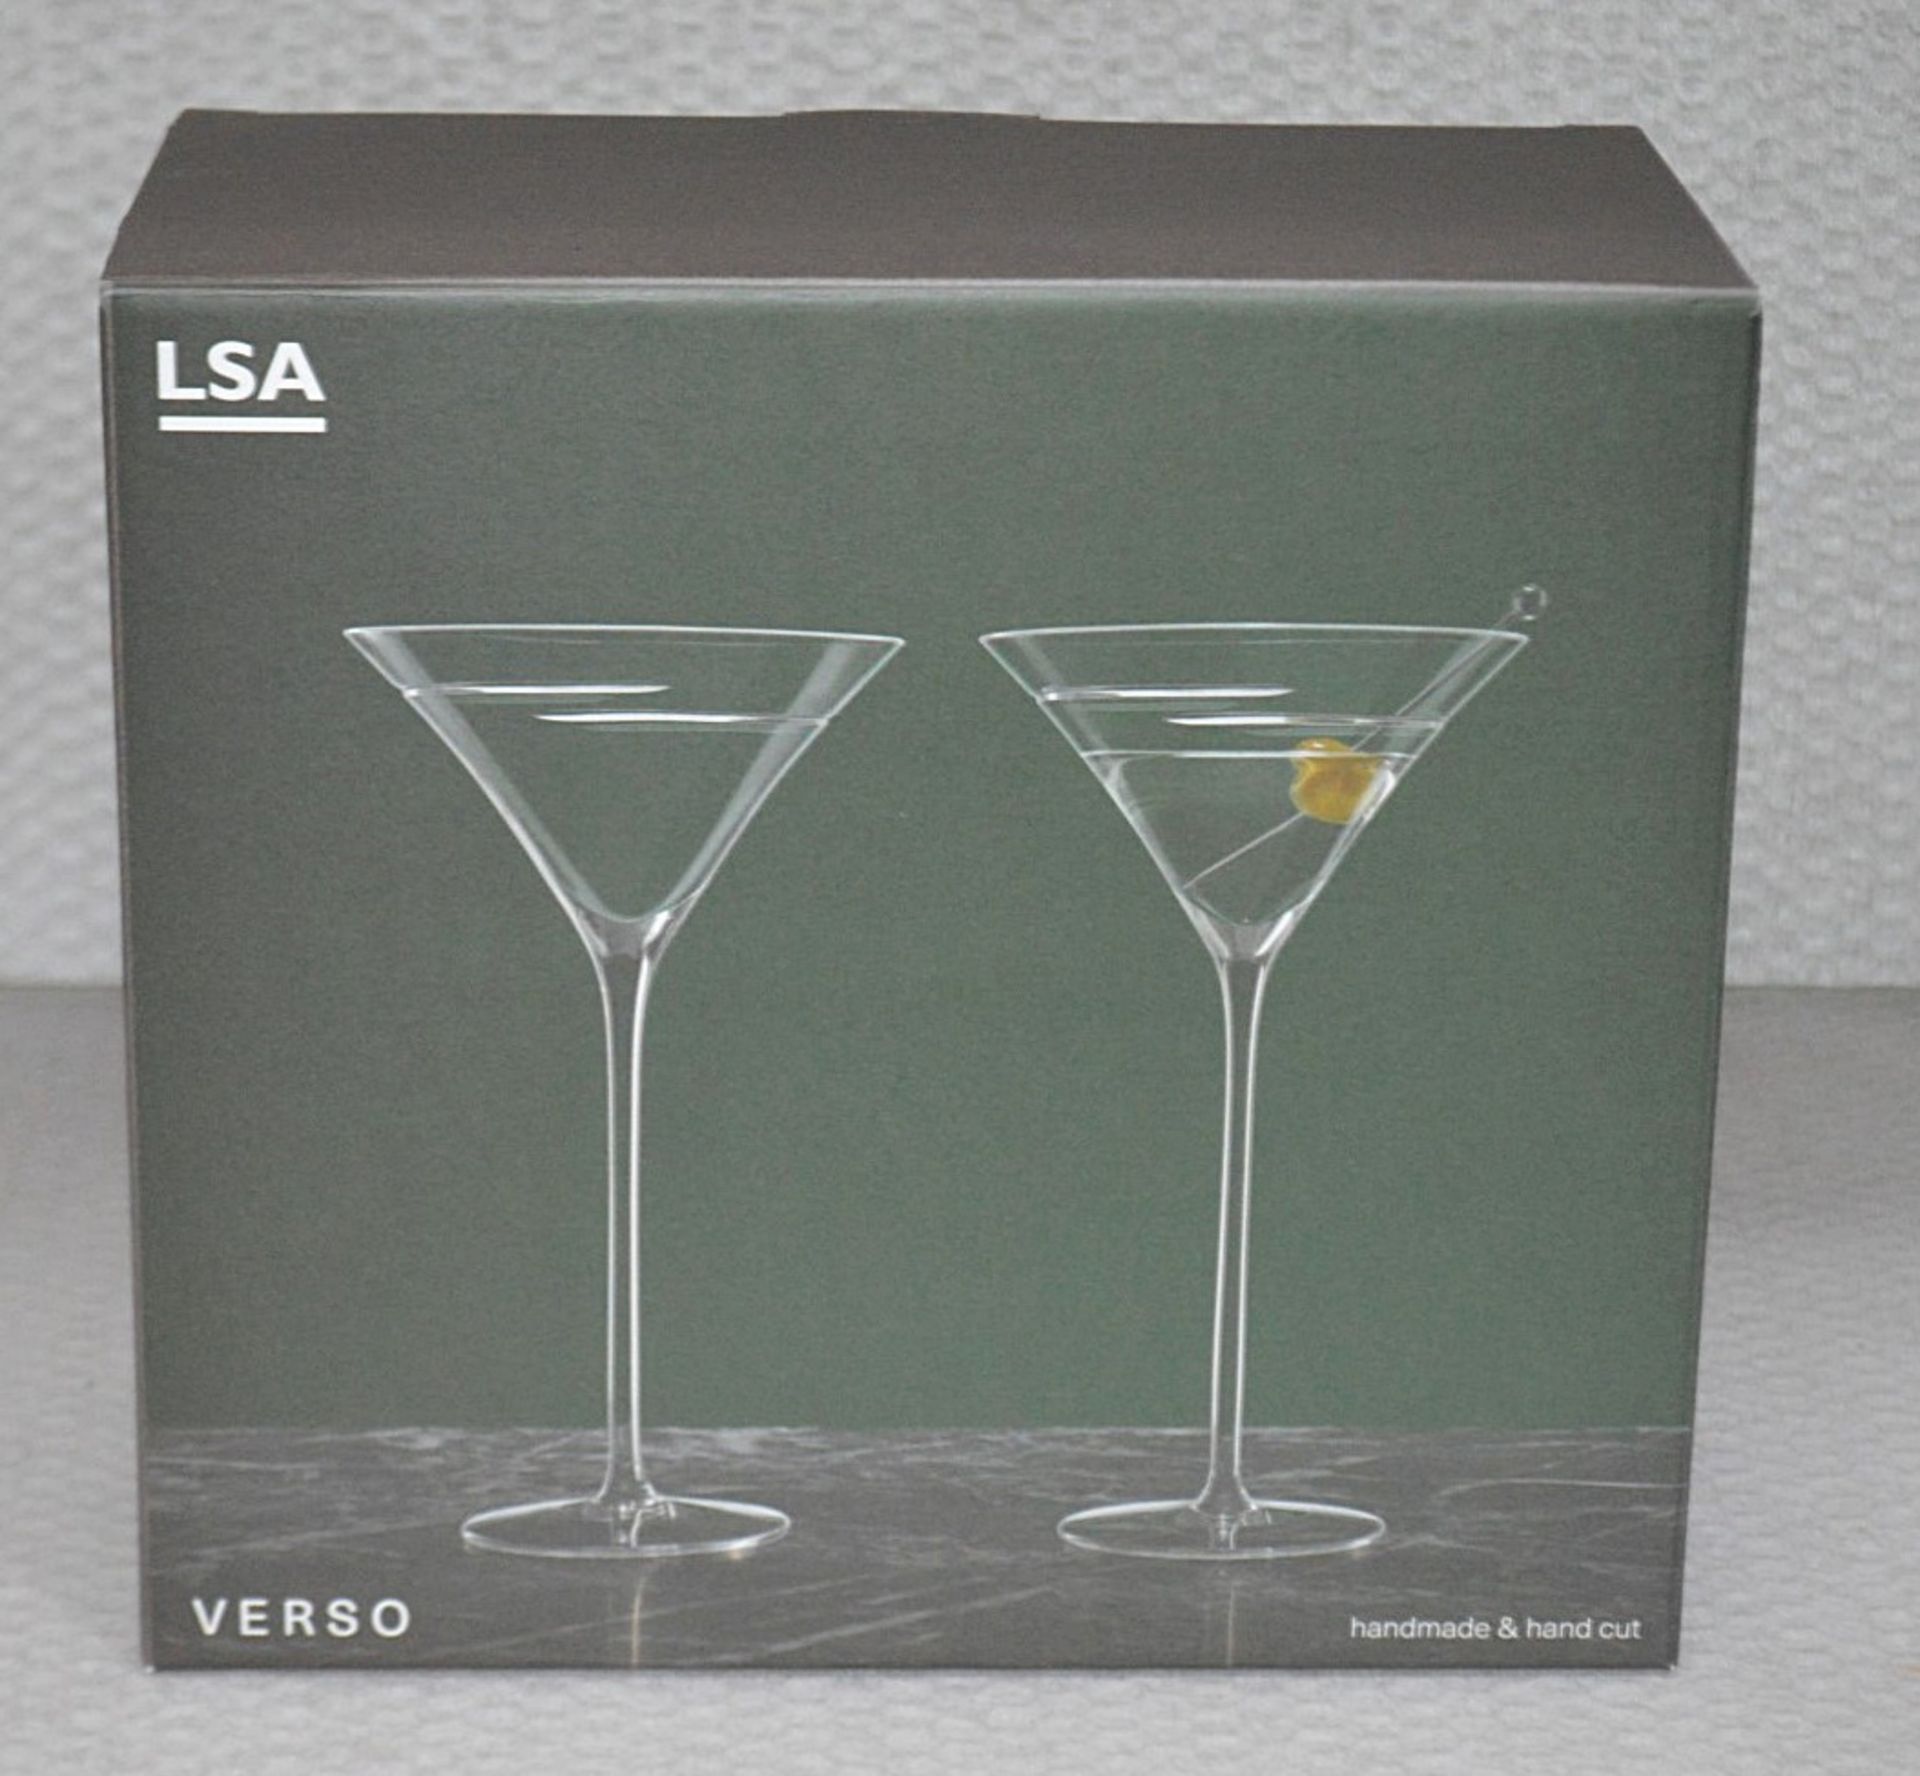 1 x LSA INTERNATIONAL Verso Cocktail Glass (275ml) - Unused Boxed Stock - Image 2 of 4